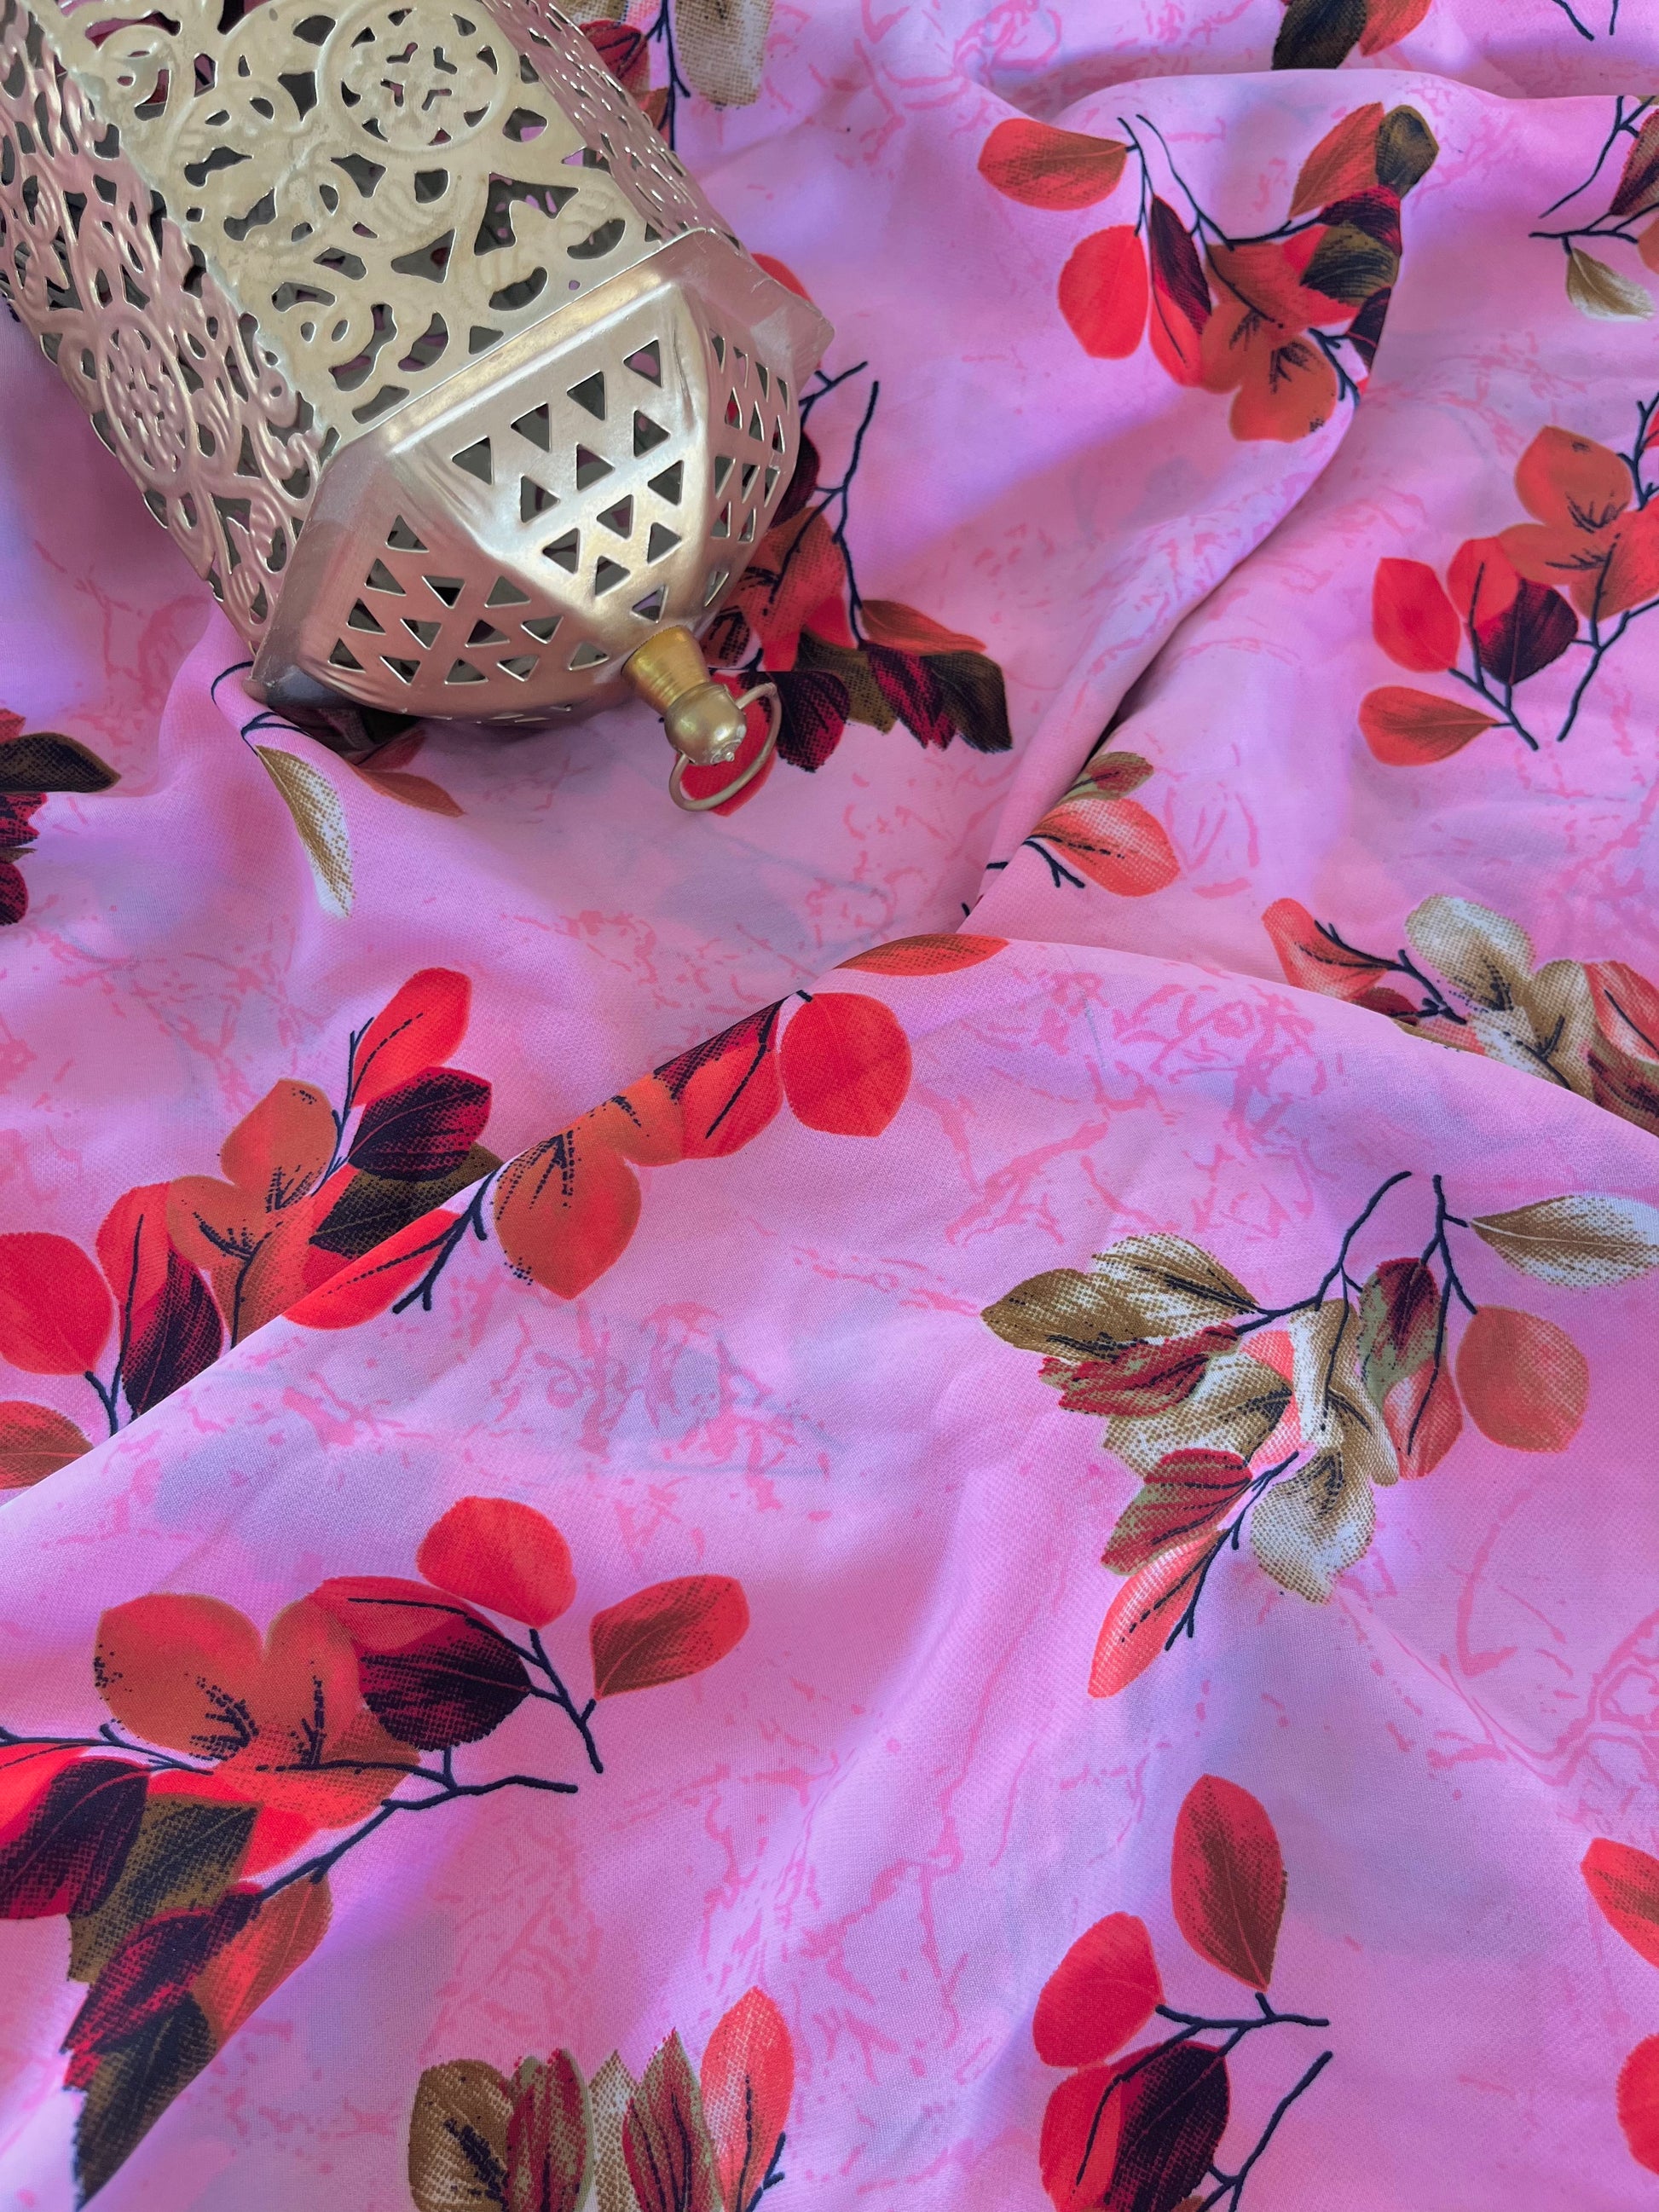 Baby Pink Floral Crepe Fabric